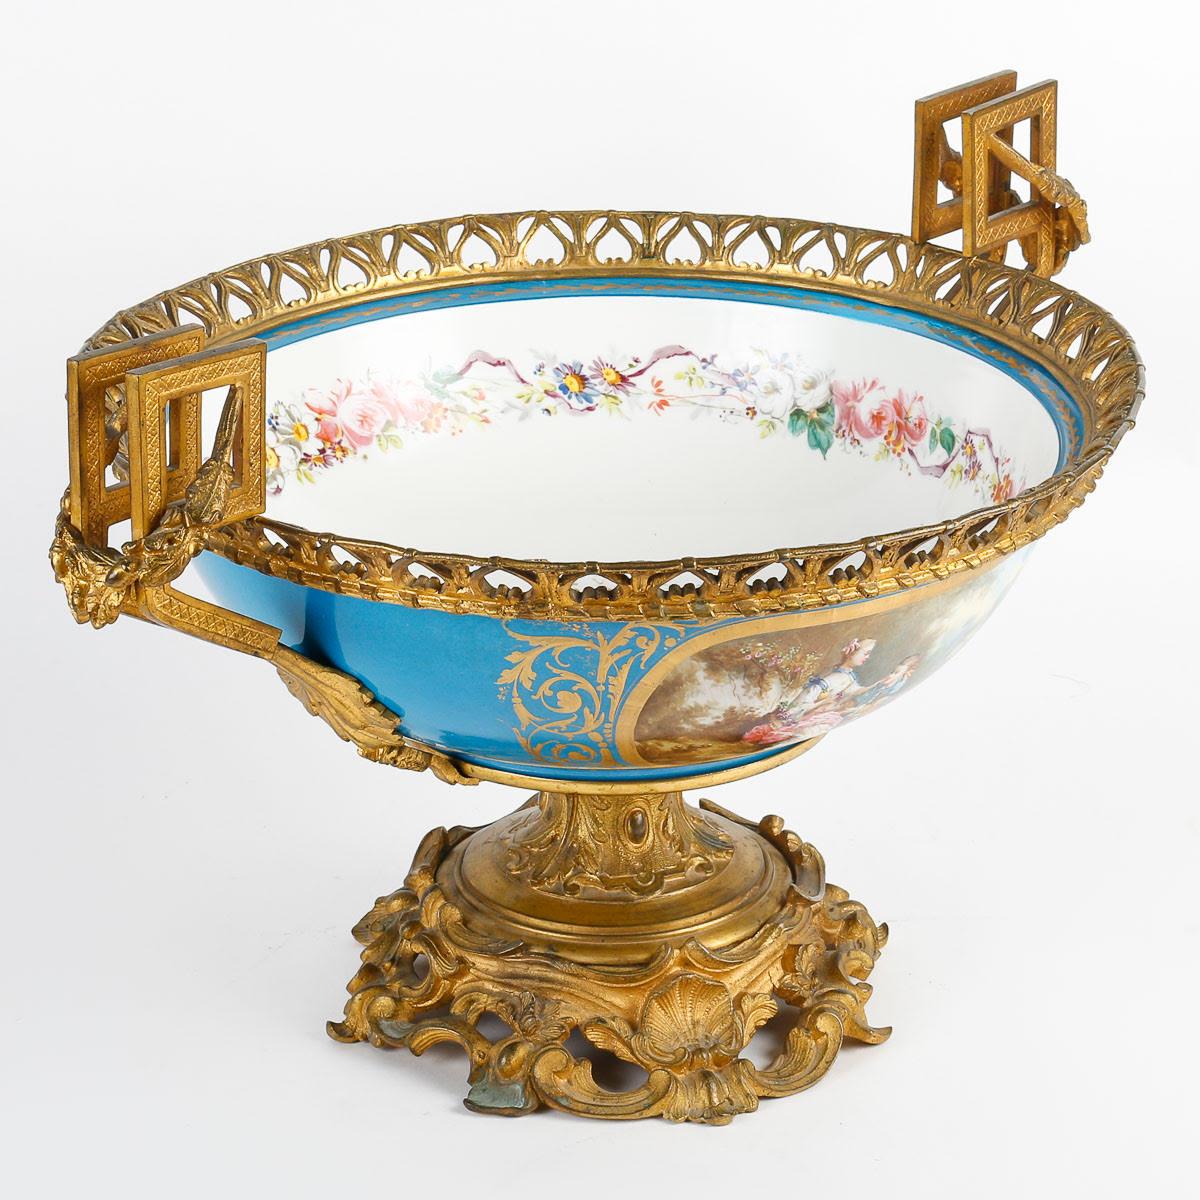 French Large 19th Century Sèvres Porcelain Bowl, Napoleon III Period.